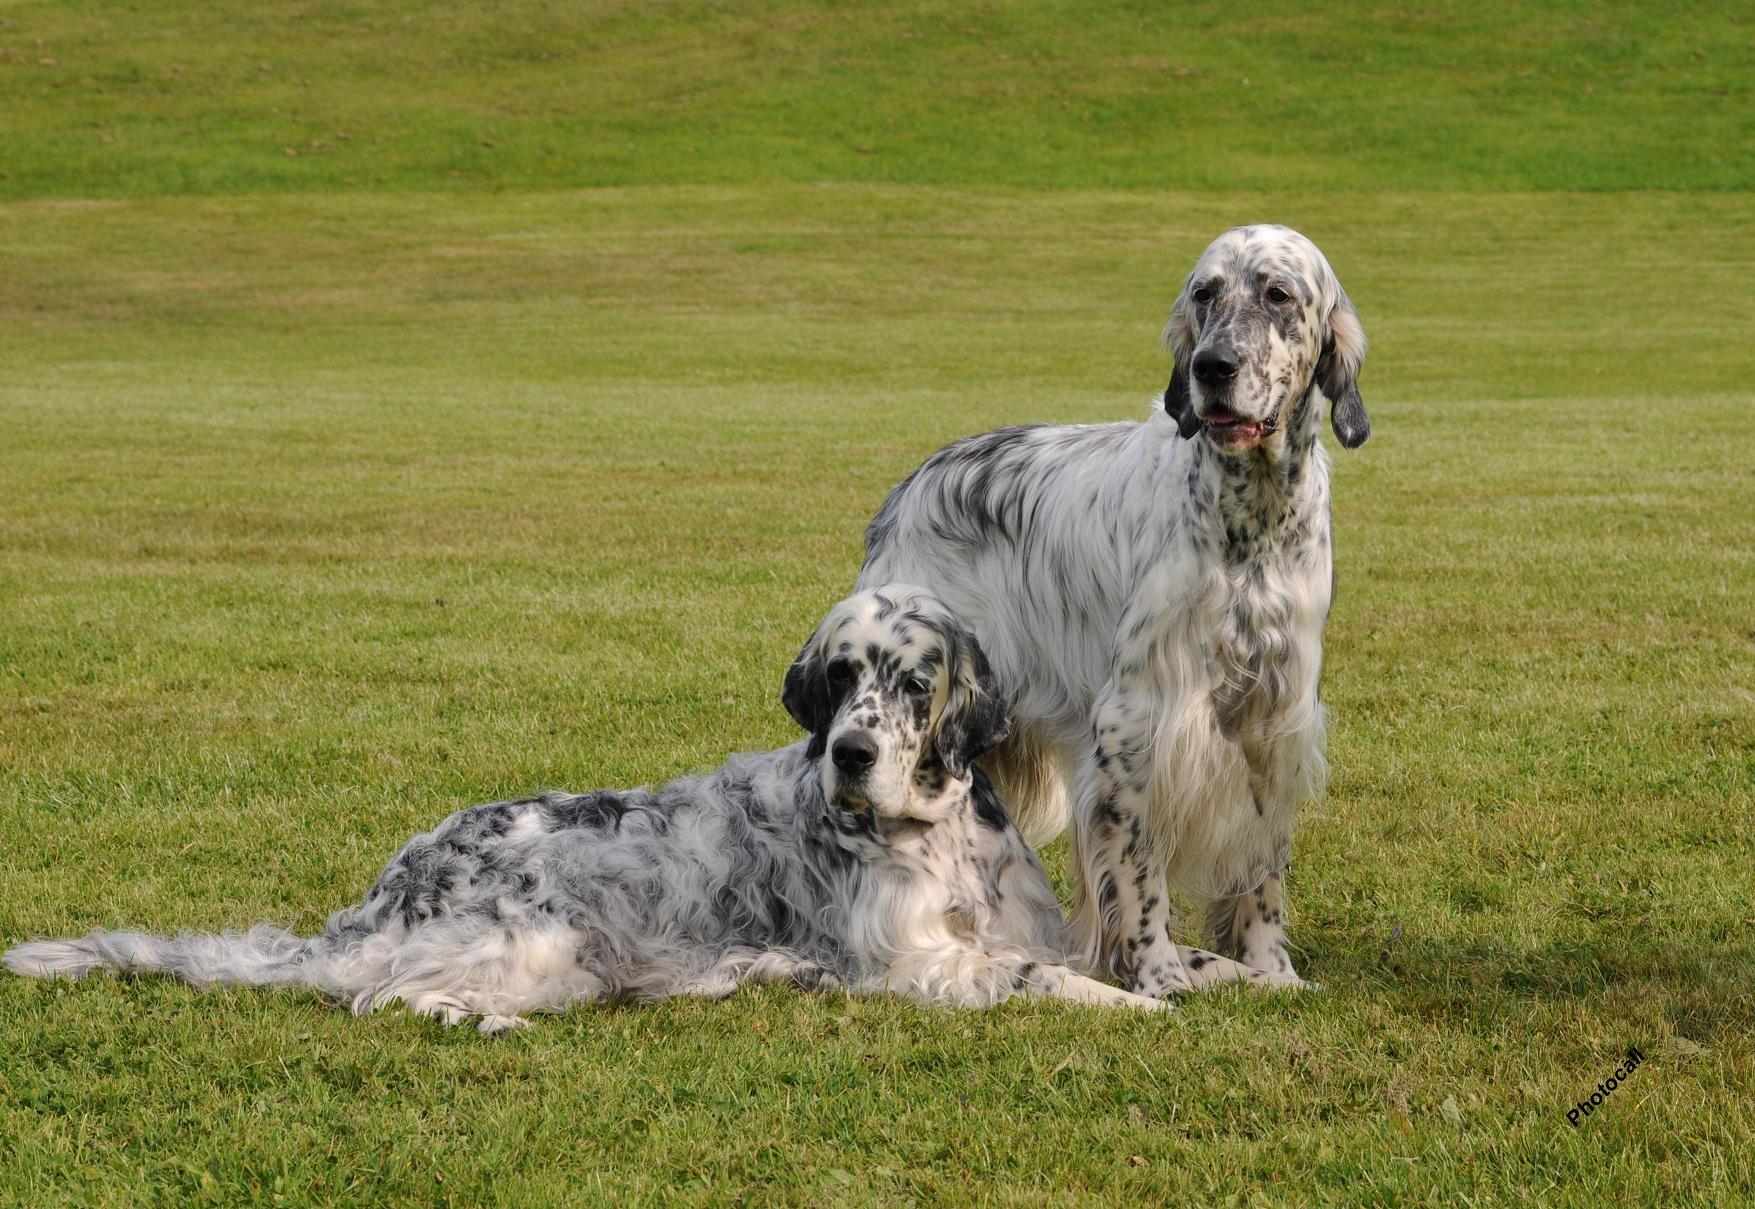 English Setter. All Dog Photo and Wallpaper